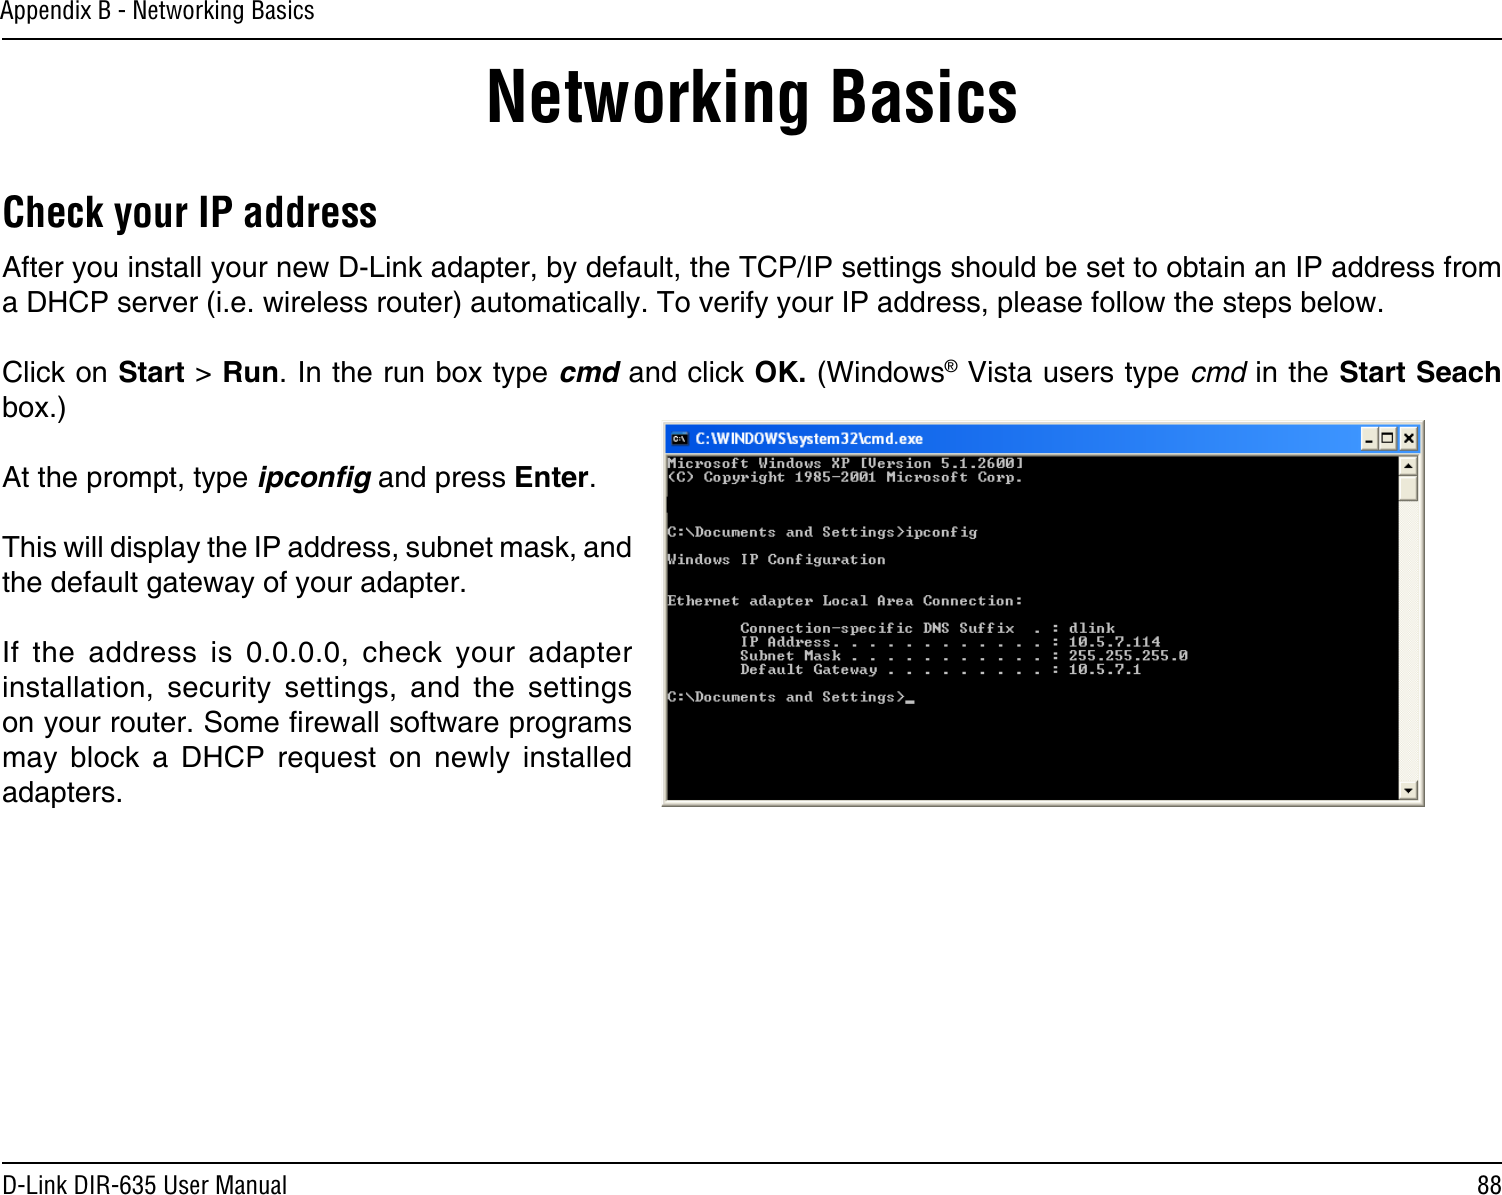 88D-Link DIR-635 User ManualAppendix B - Networking BasicsNetworking BasicsCheck your IP addressAfter you install your new D-Link adapter, by default, the TCP/IP settings should be set to obtain an IP address from a DHCP server (i.e. wireless router) automatically. To verify your IP address, please follow the steps below.Click on Start &gt; Run. In the run box type cmd and click OK. (Windows® Vista users type cmd in the Start Seach box.)At the prompt, type ipconﬁg and press Enter.This will display the IP address, subnet mask, and the default gateway of your adapter.If  the  address  is  0.0.0.0,  check  your  adapter installation,  security  settings,  and  the  settings on your router. Some rewall software programs may  block  a  DHCP  request  on  newly  installed adapters. 